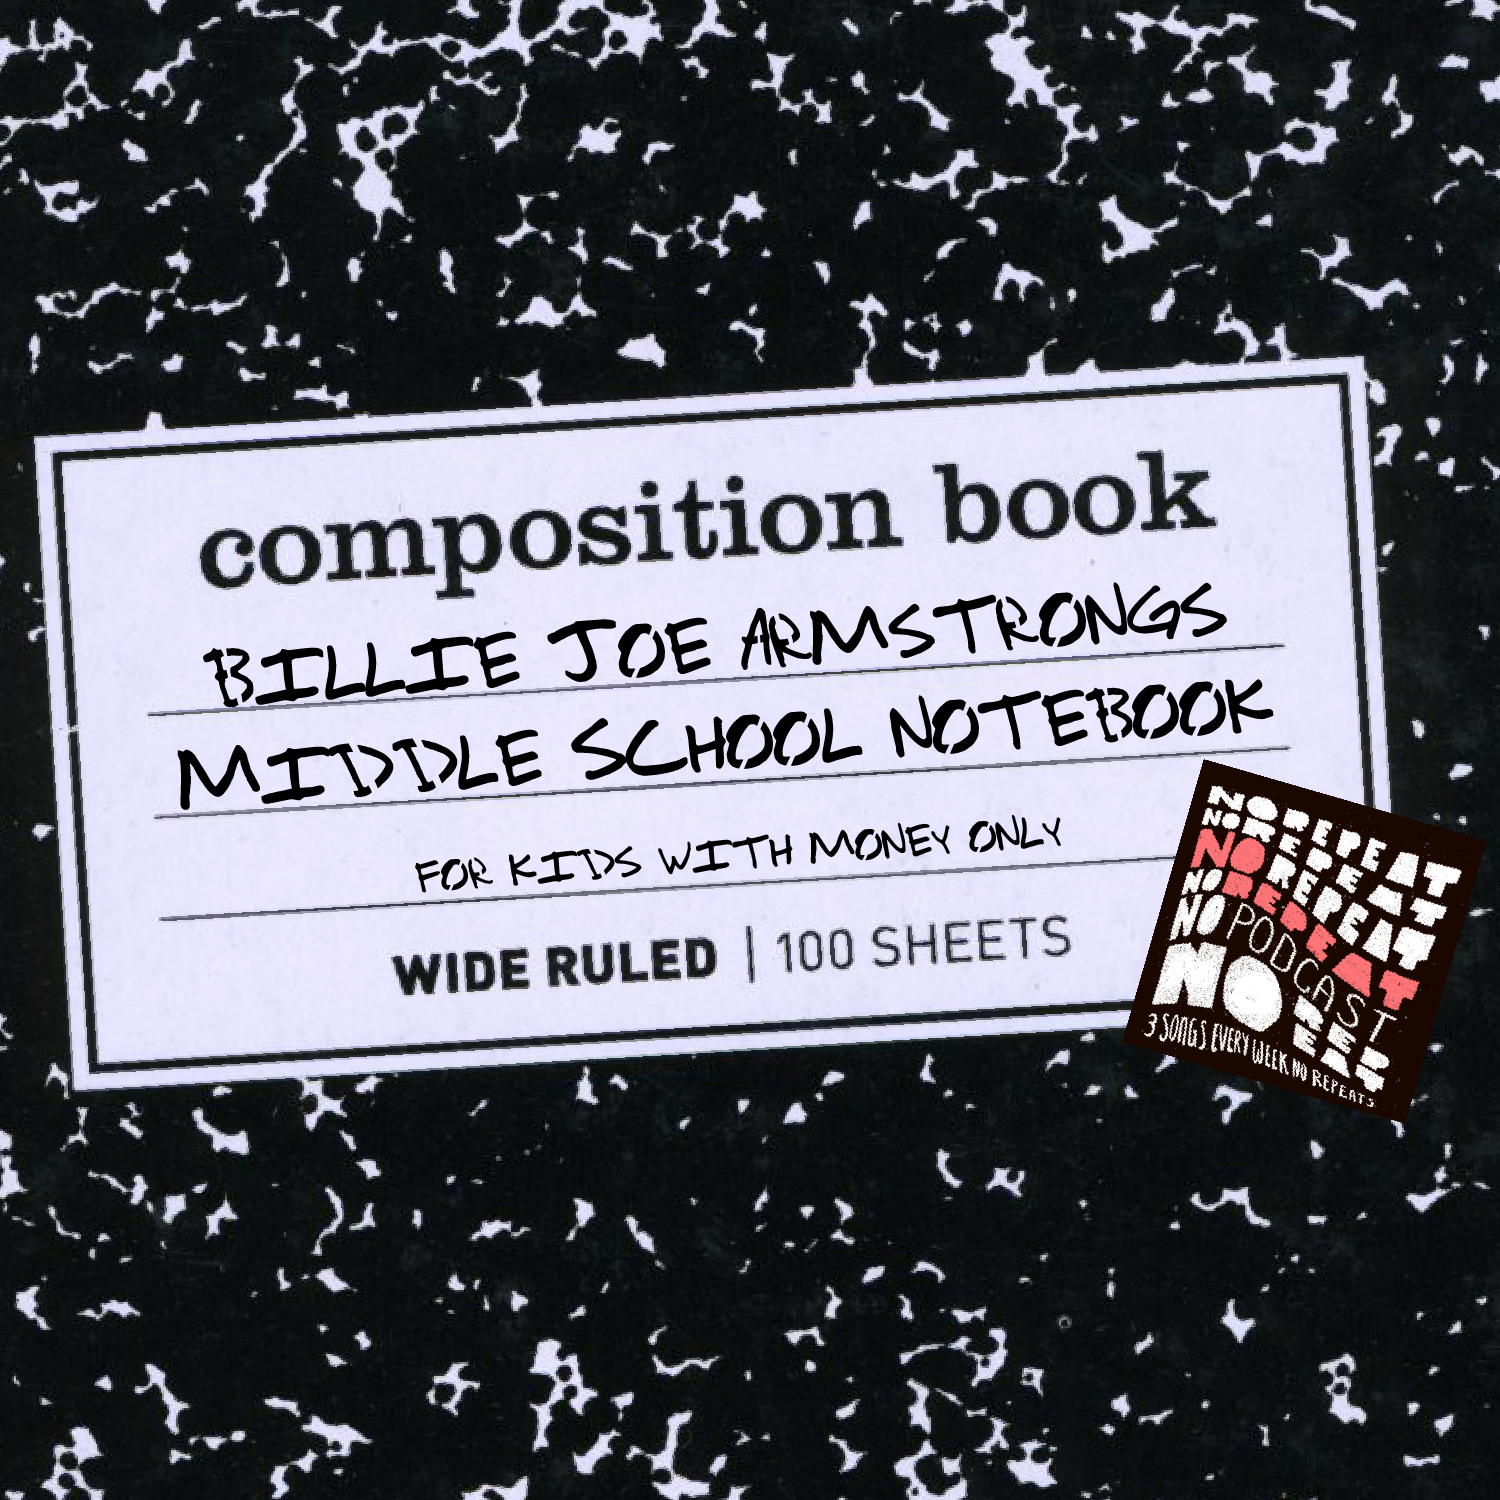 Podcast art for Billy Joe Armstrong's Middle School Notebook